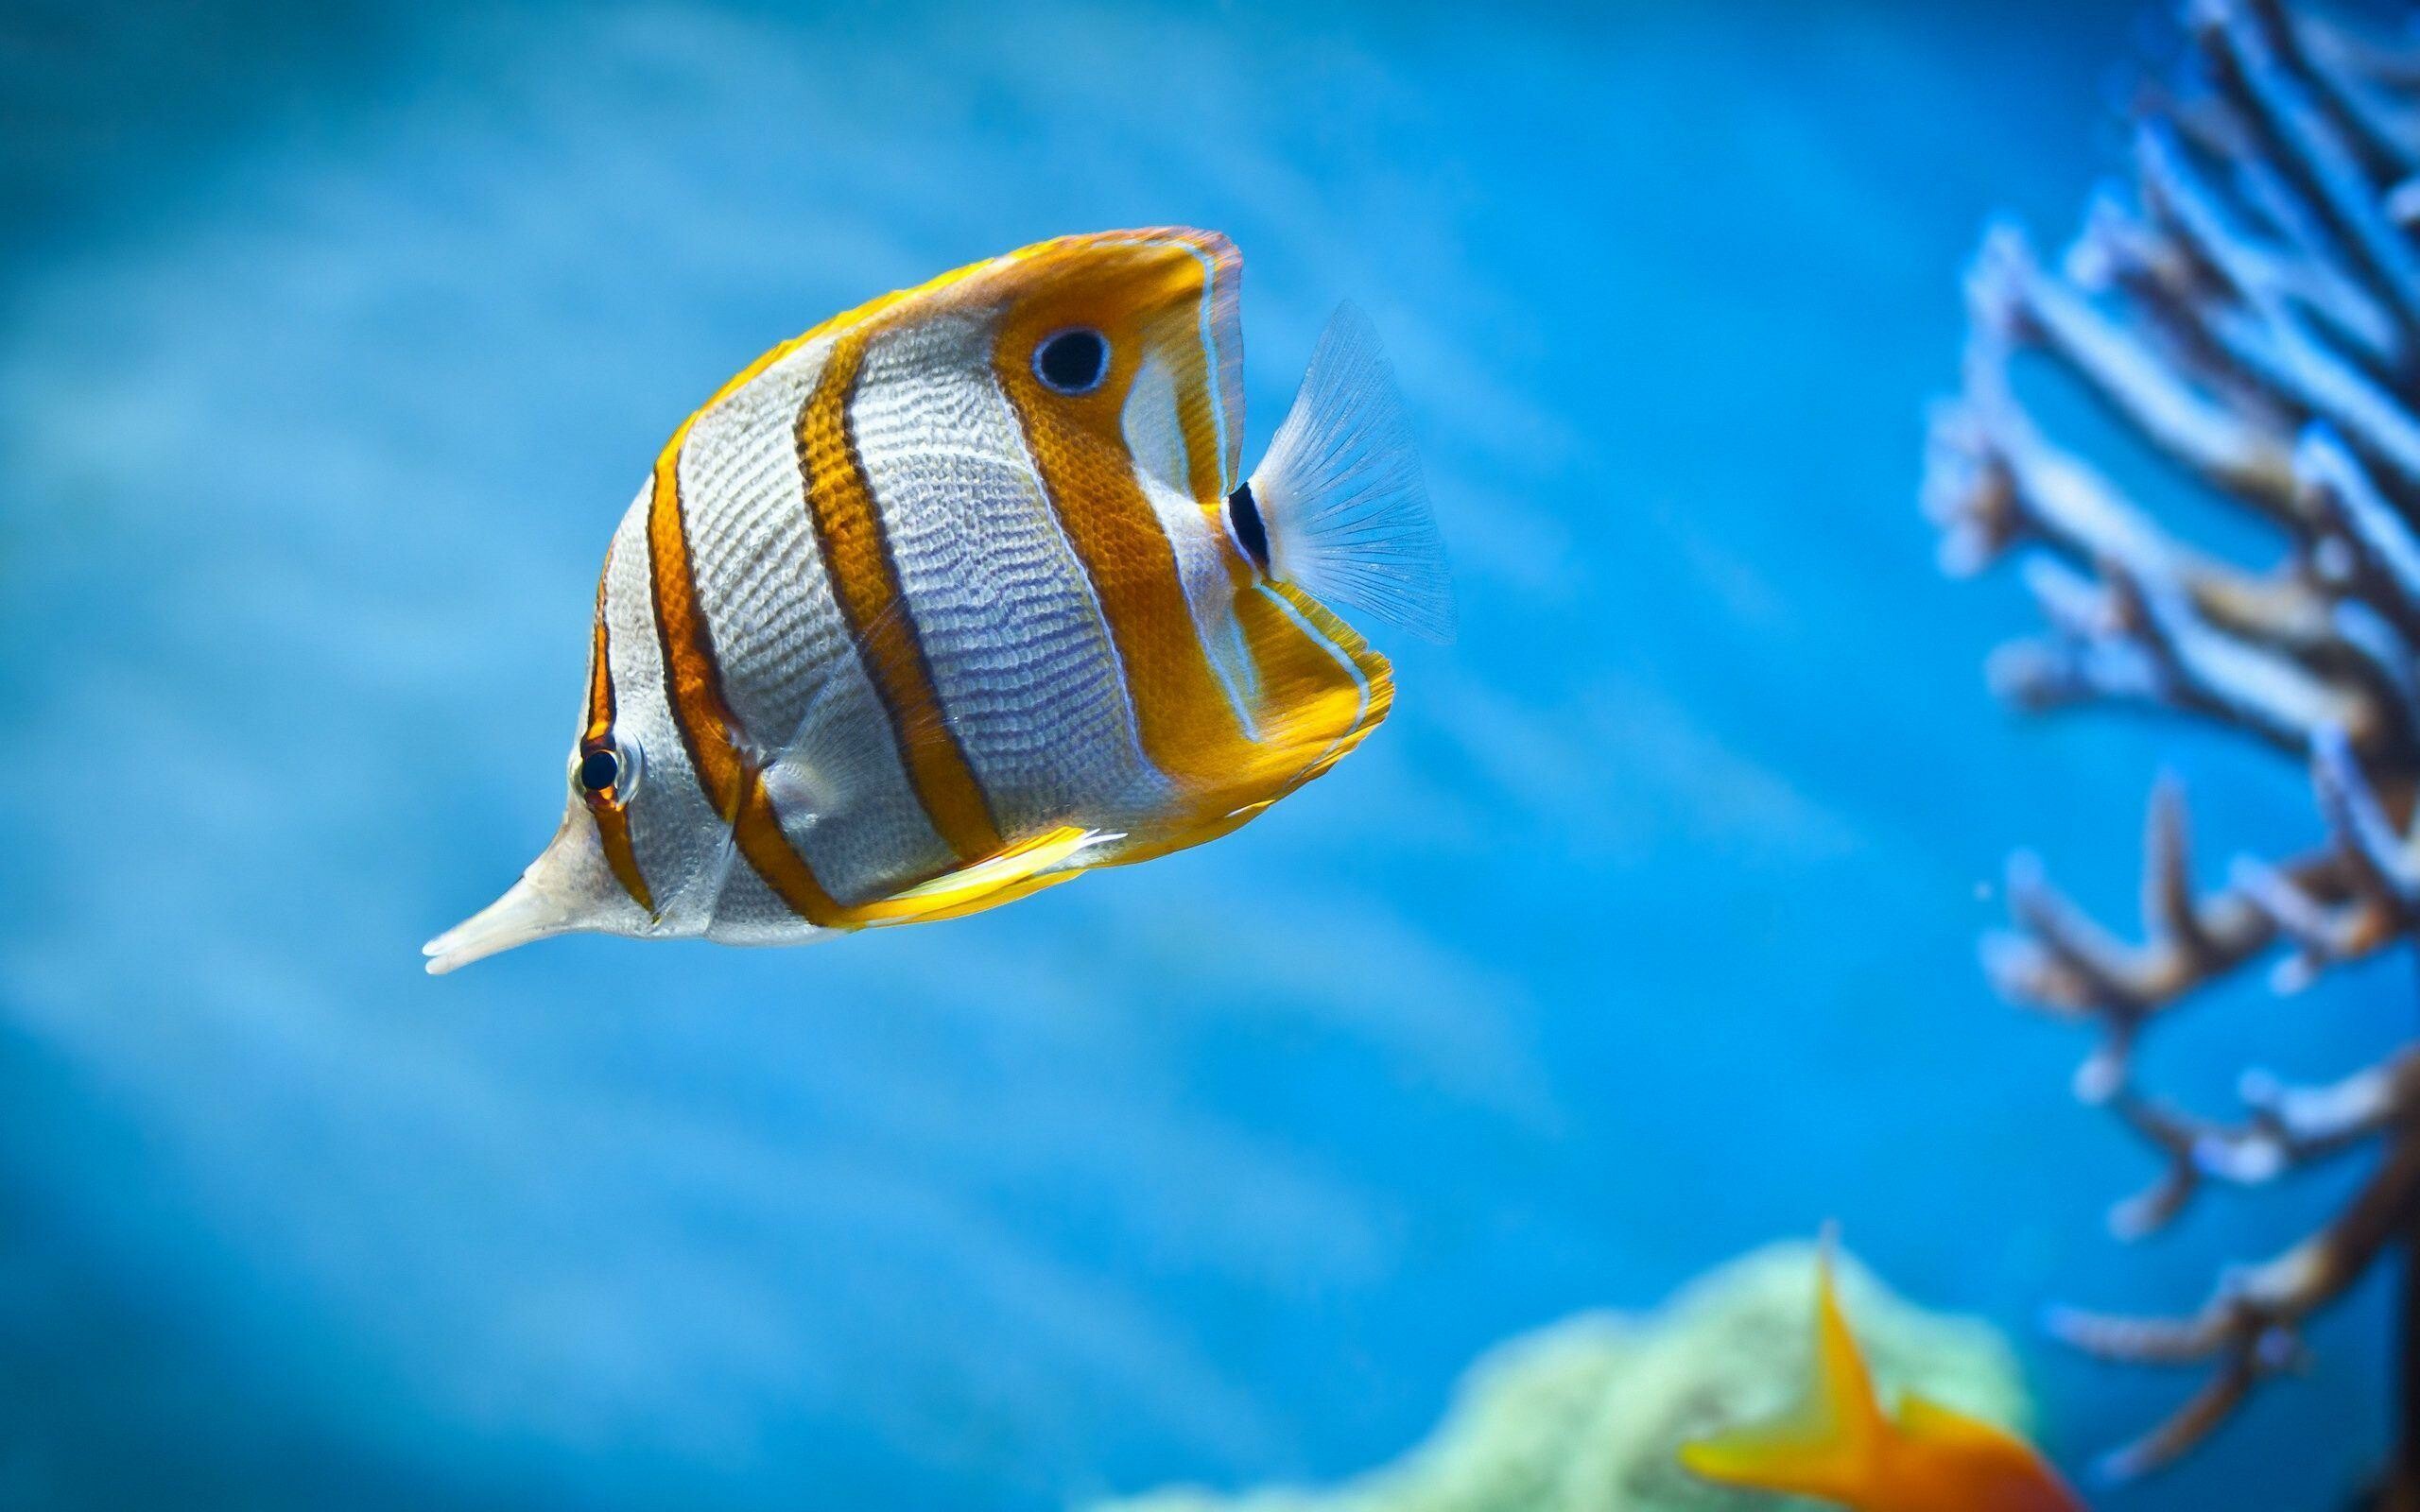 Fish: Copperband butterflyfish, Identified by the yellow banding and long snout. 2560x1600 HD Wallpaper.